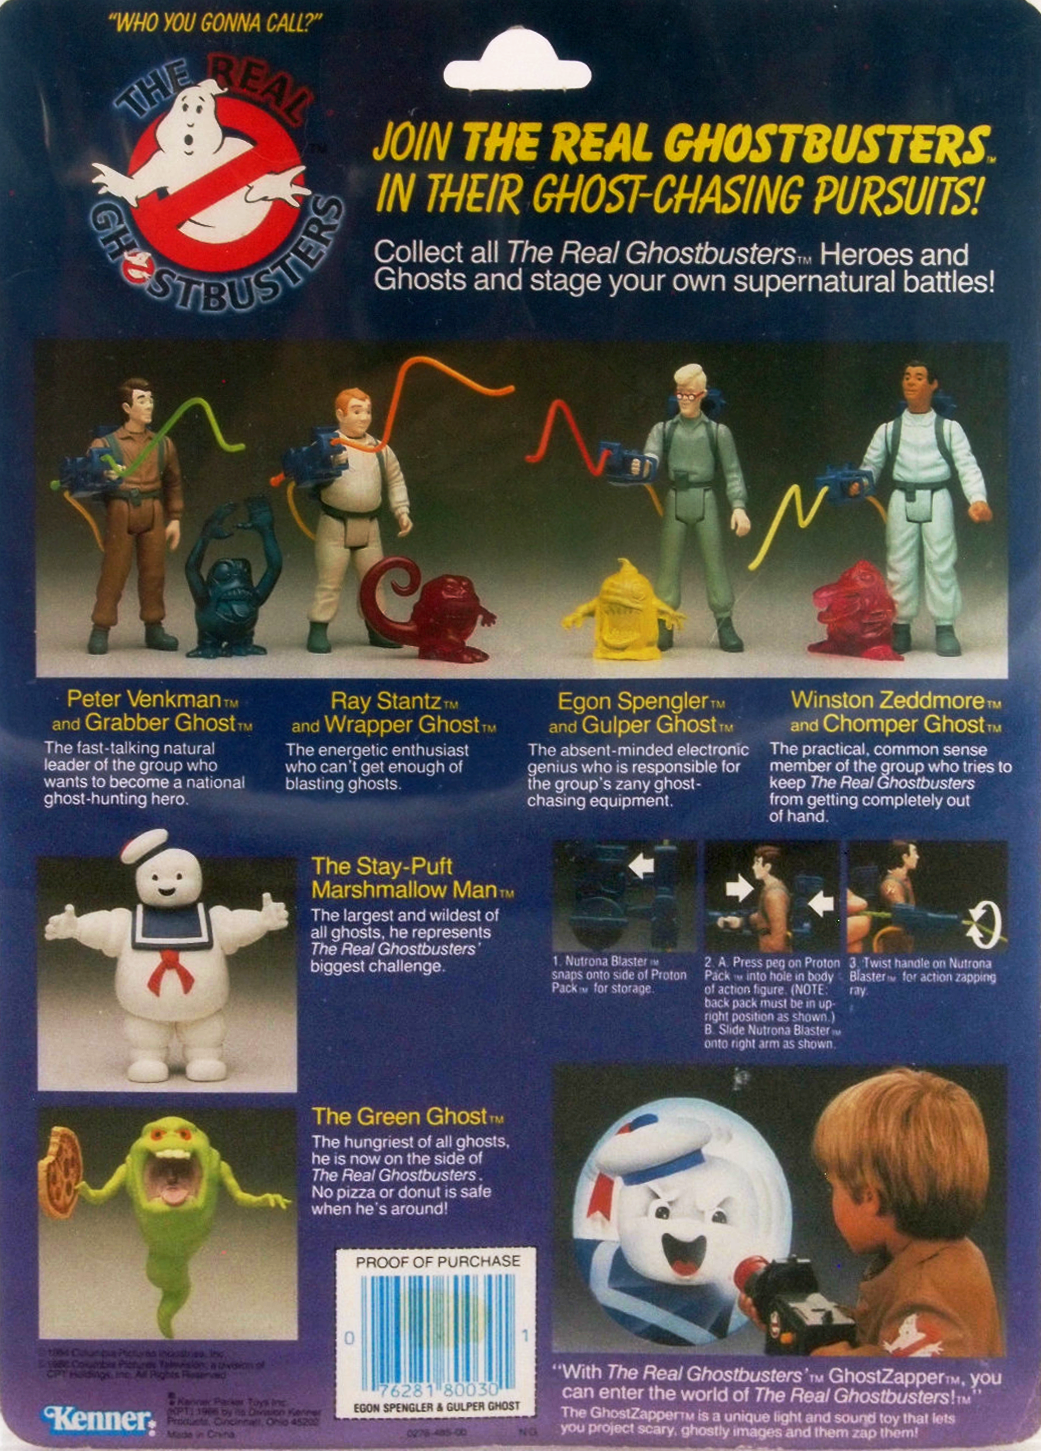 The Toy Box: The Real Ghostbusters (Kenner)